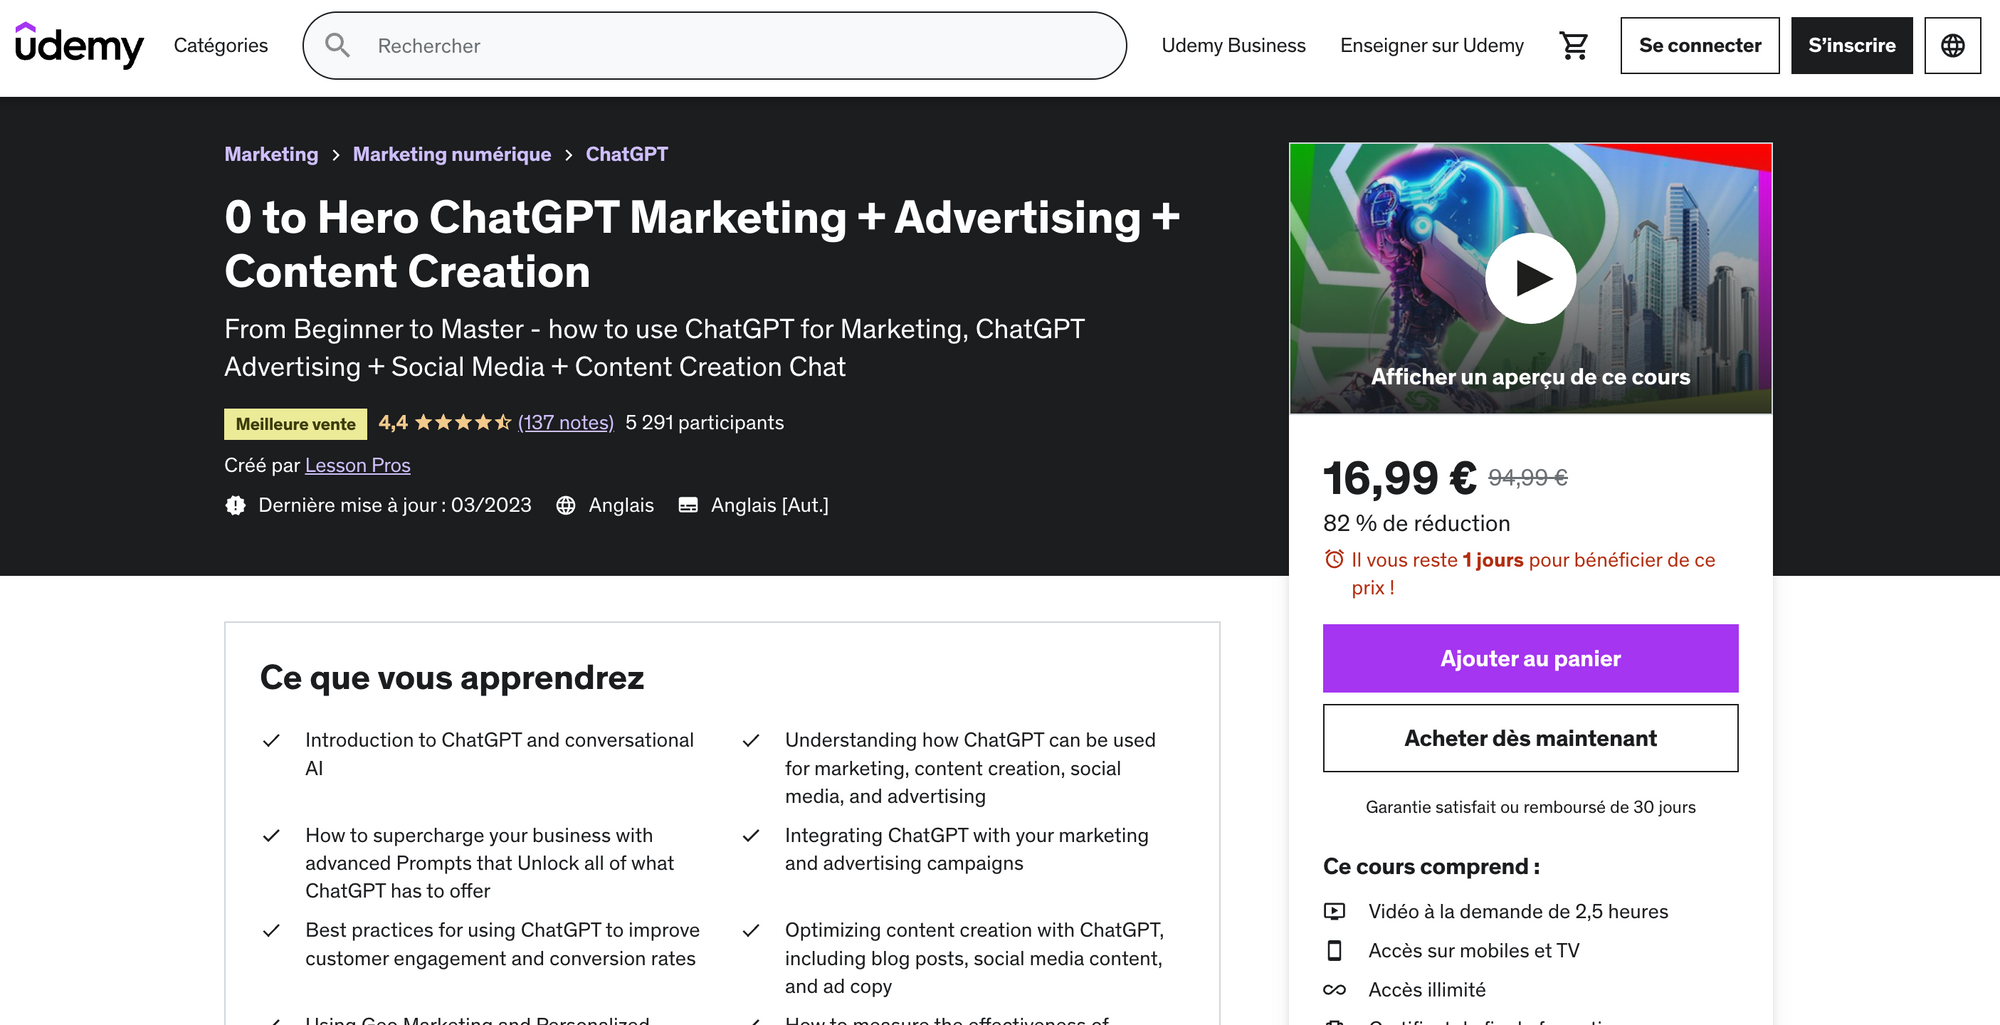 0 to Hero ChatGPT Marketing + Advertising + Content Creation